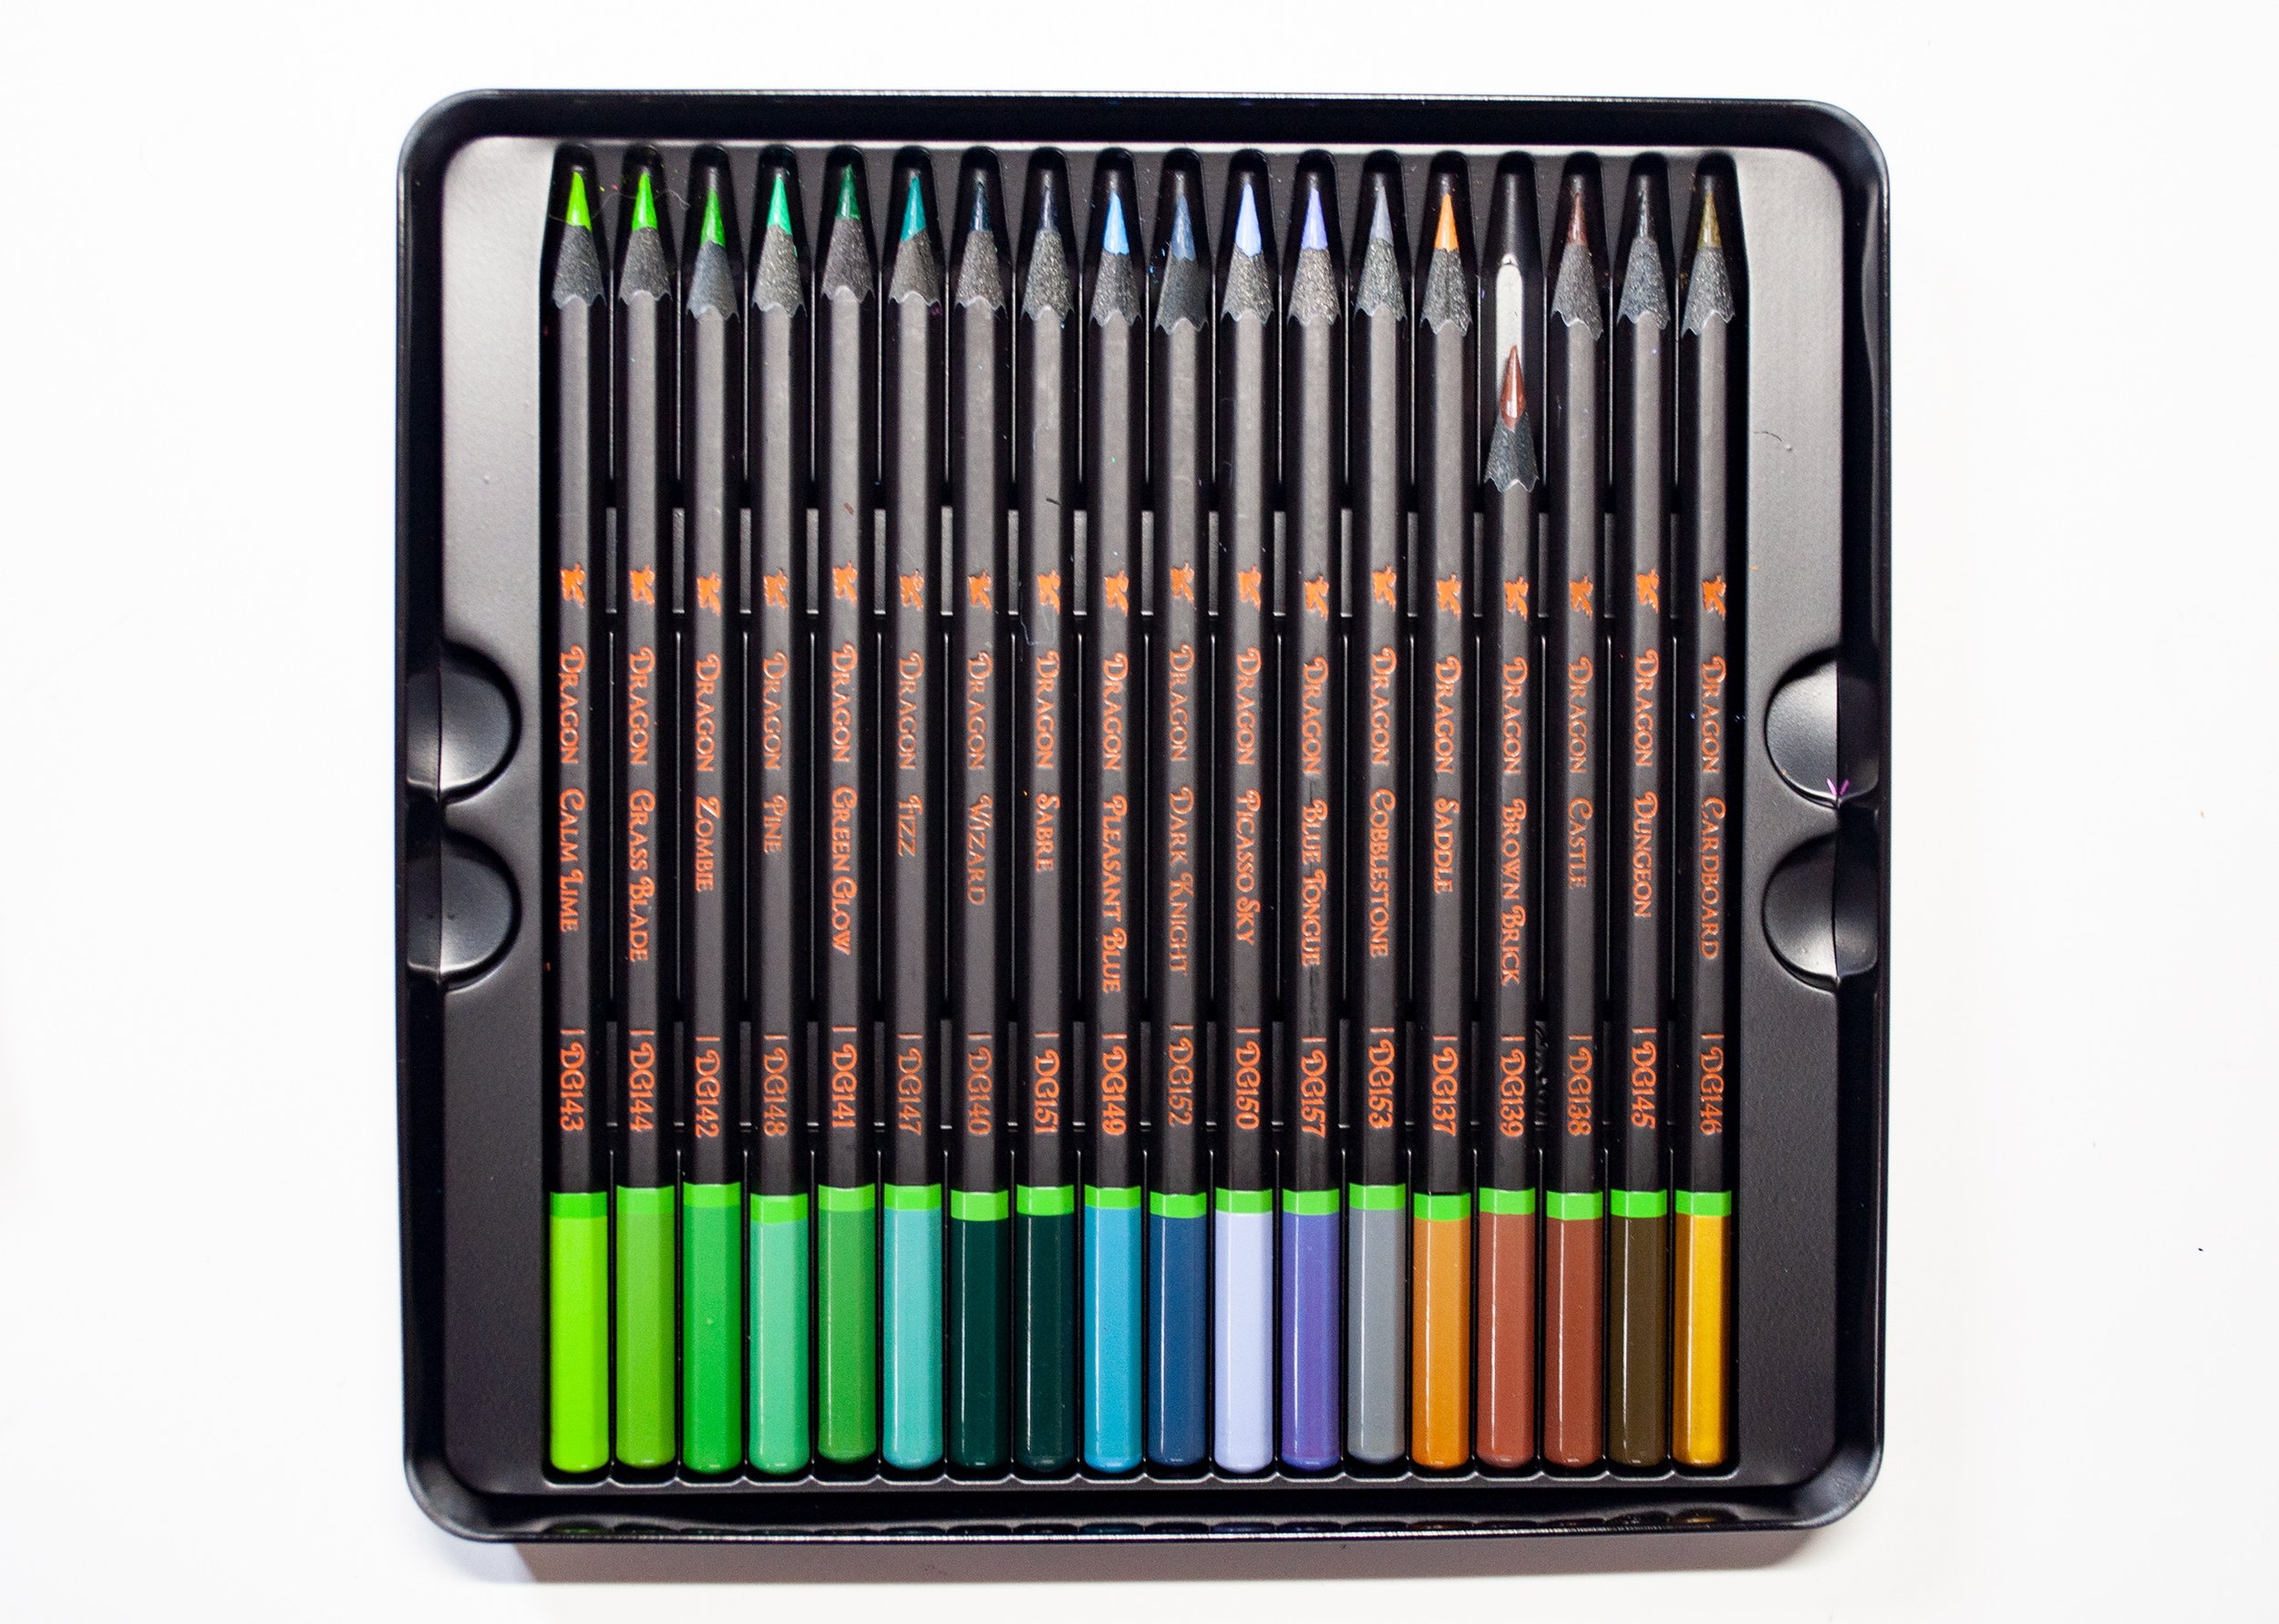 Black Widow Colored Pencils For Adult Coloring - 24 Coloring Pencils With  Smooth Pigments - Best Color Pencil Set For Adult Coloring Books And  Drawing 